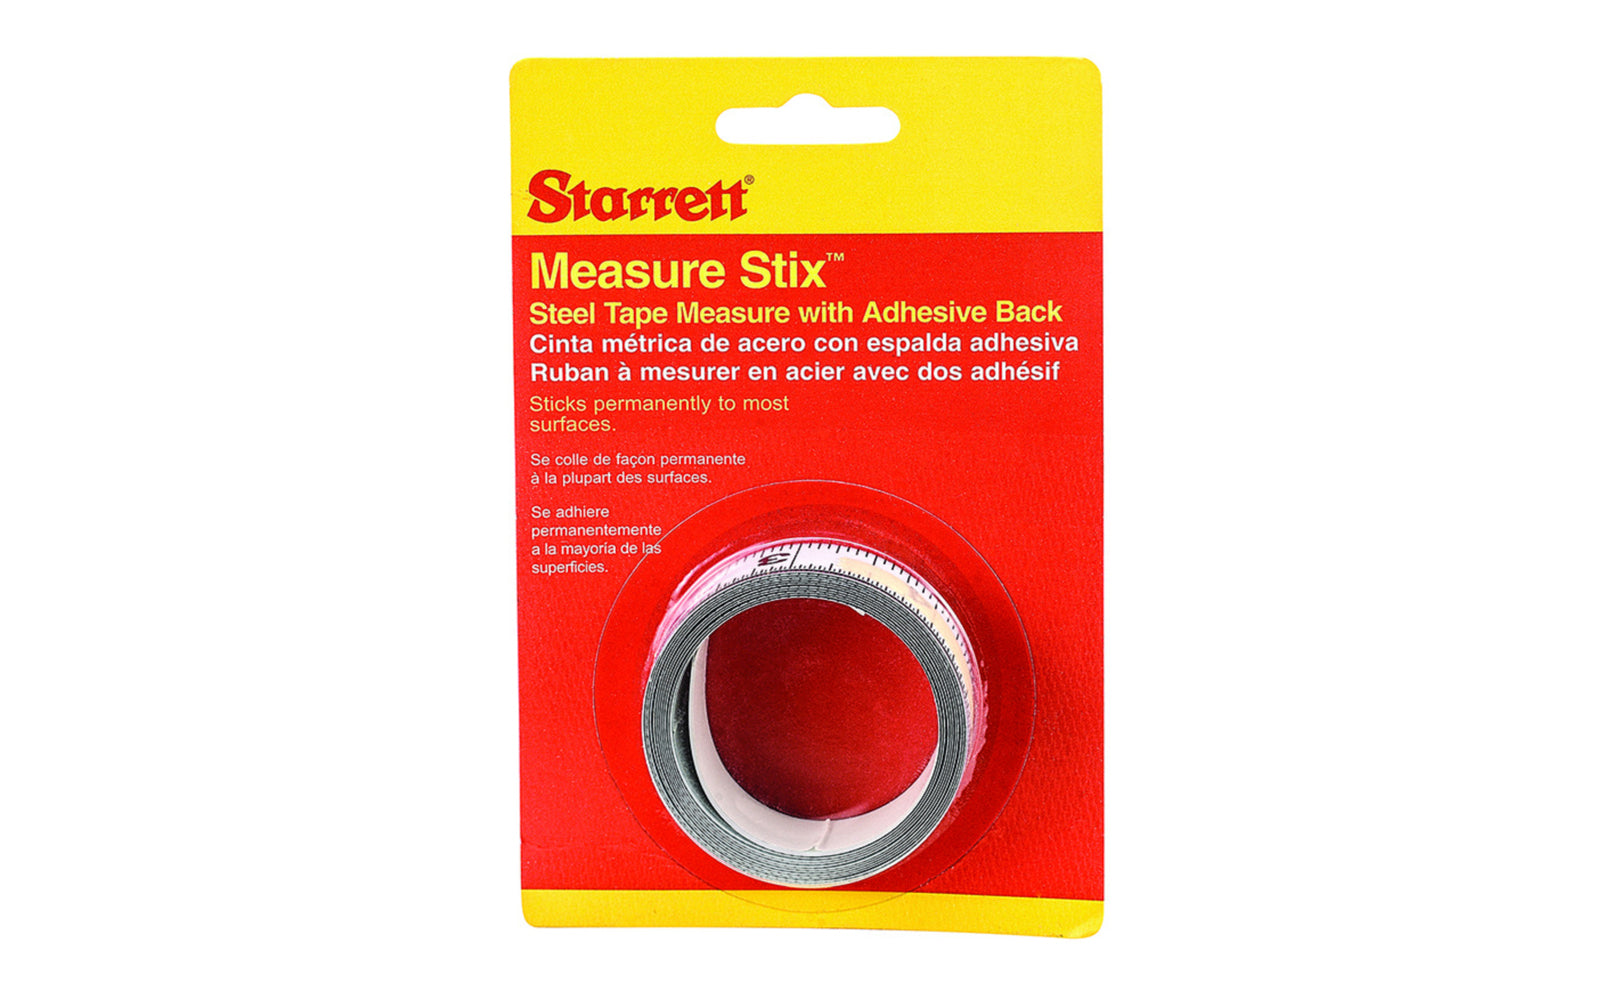 Starrett 6' Measure stix is manufactured with high quality precision steel. Produced with a permanent adhesive backing providing convenient, at-a-glance measurements. Can be mounted on work benches, saw tables, drafting tables, and more. The stix easily cut to proper size with scissors. Reads with Right to Left.